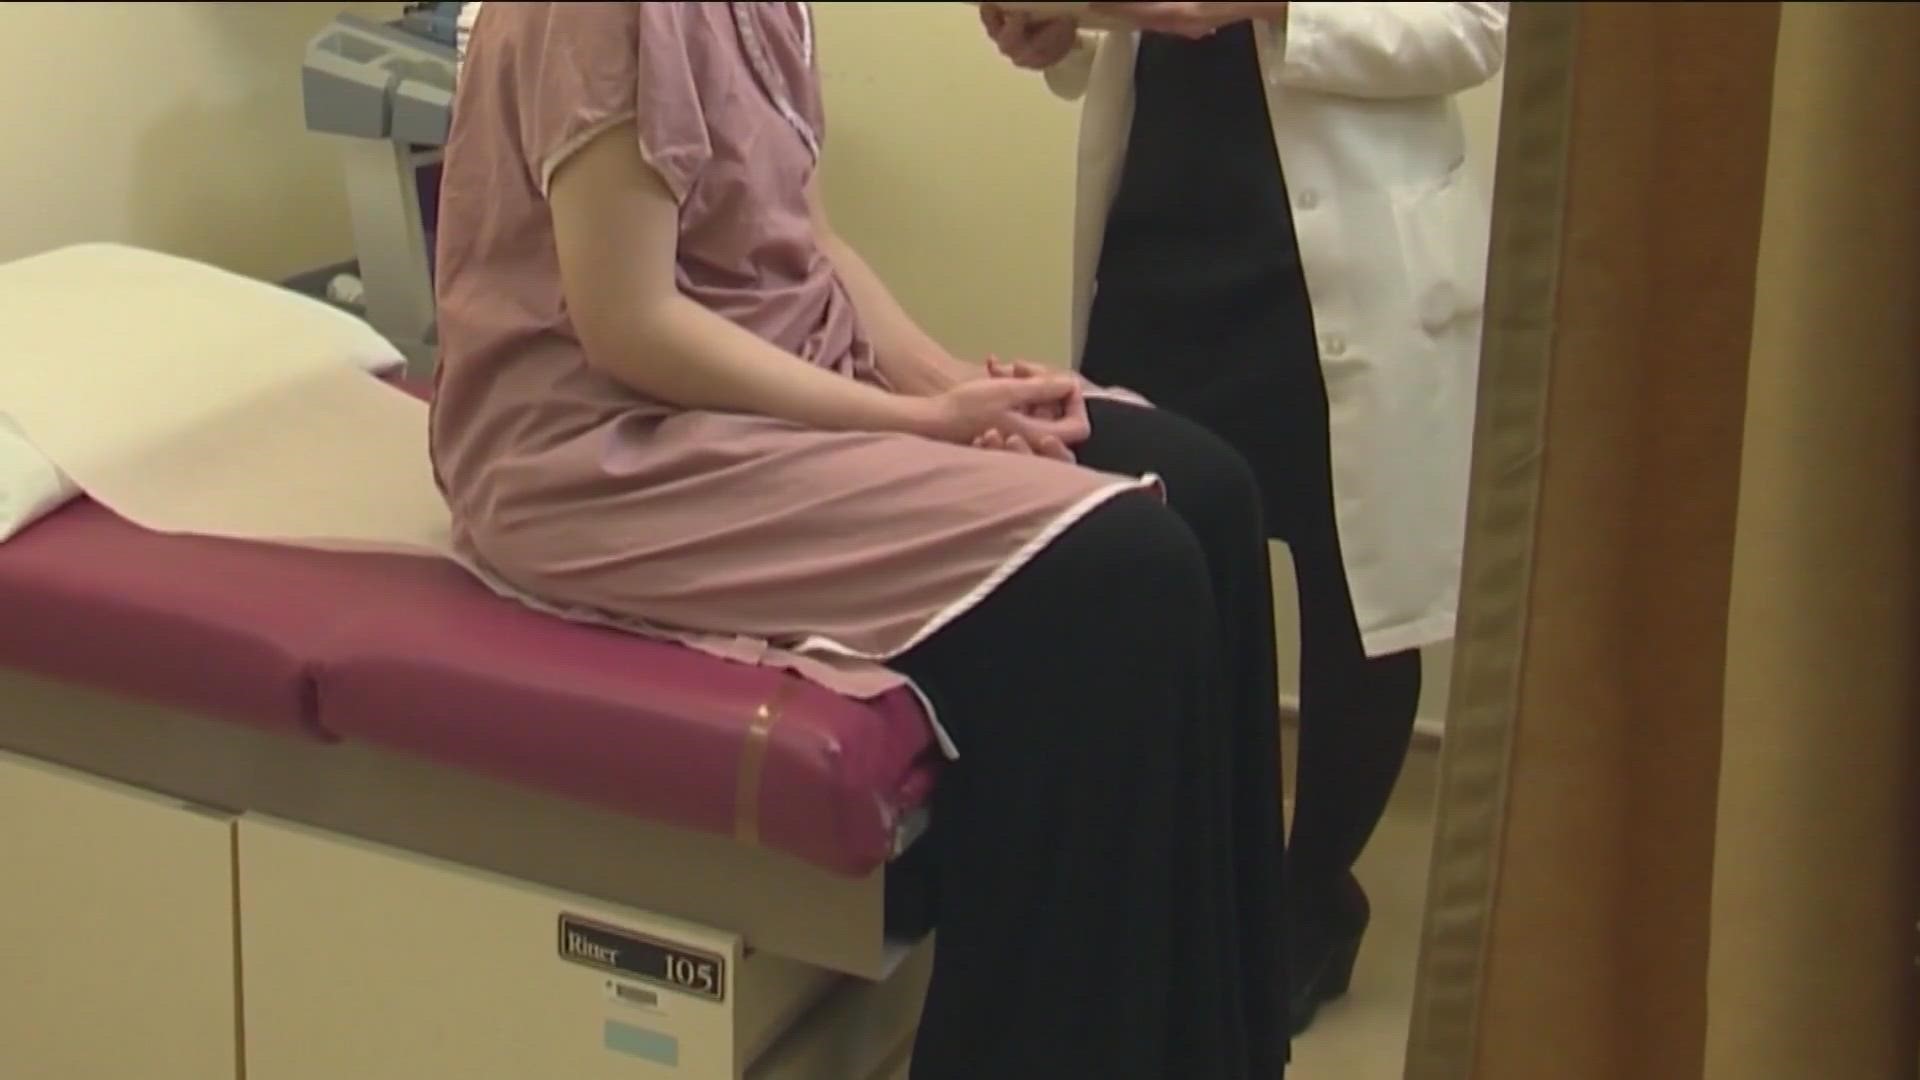 Doctors say if symptoms and/or fever persists more than a few days, then see a doctor